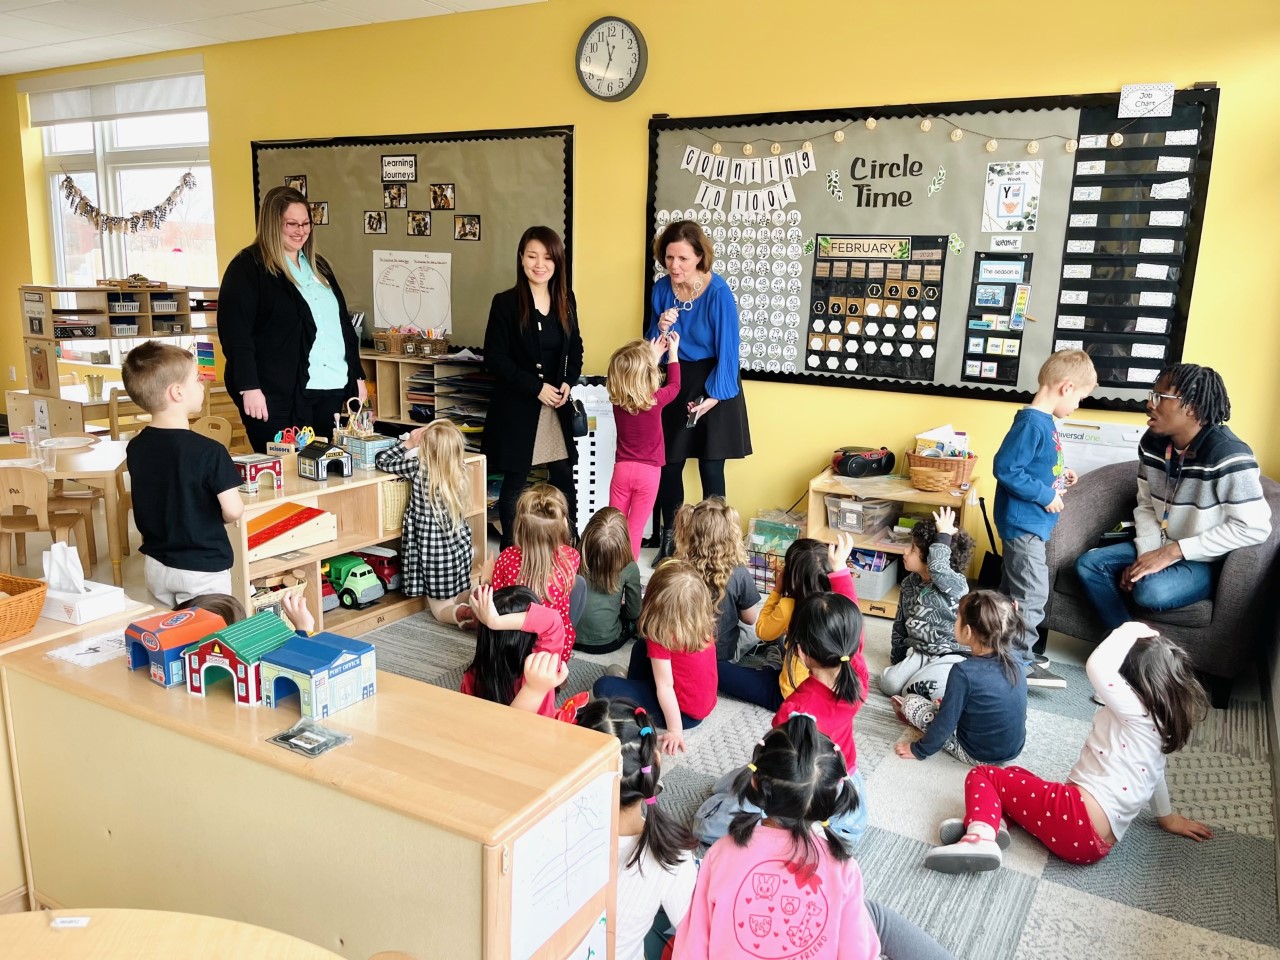 Thank you, Maureen Weber, for giving us an insightful tour of the Patty Jischke Early Care and Education Center. It was a pleasure learning about the excellent care and education provided to the children.